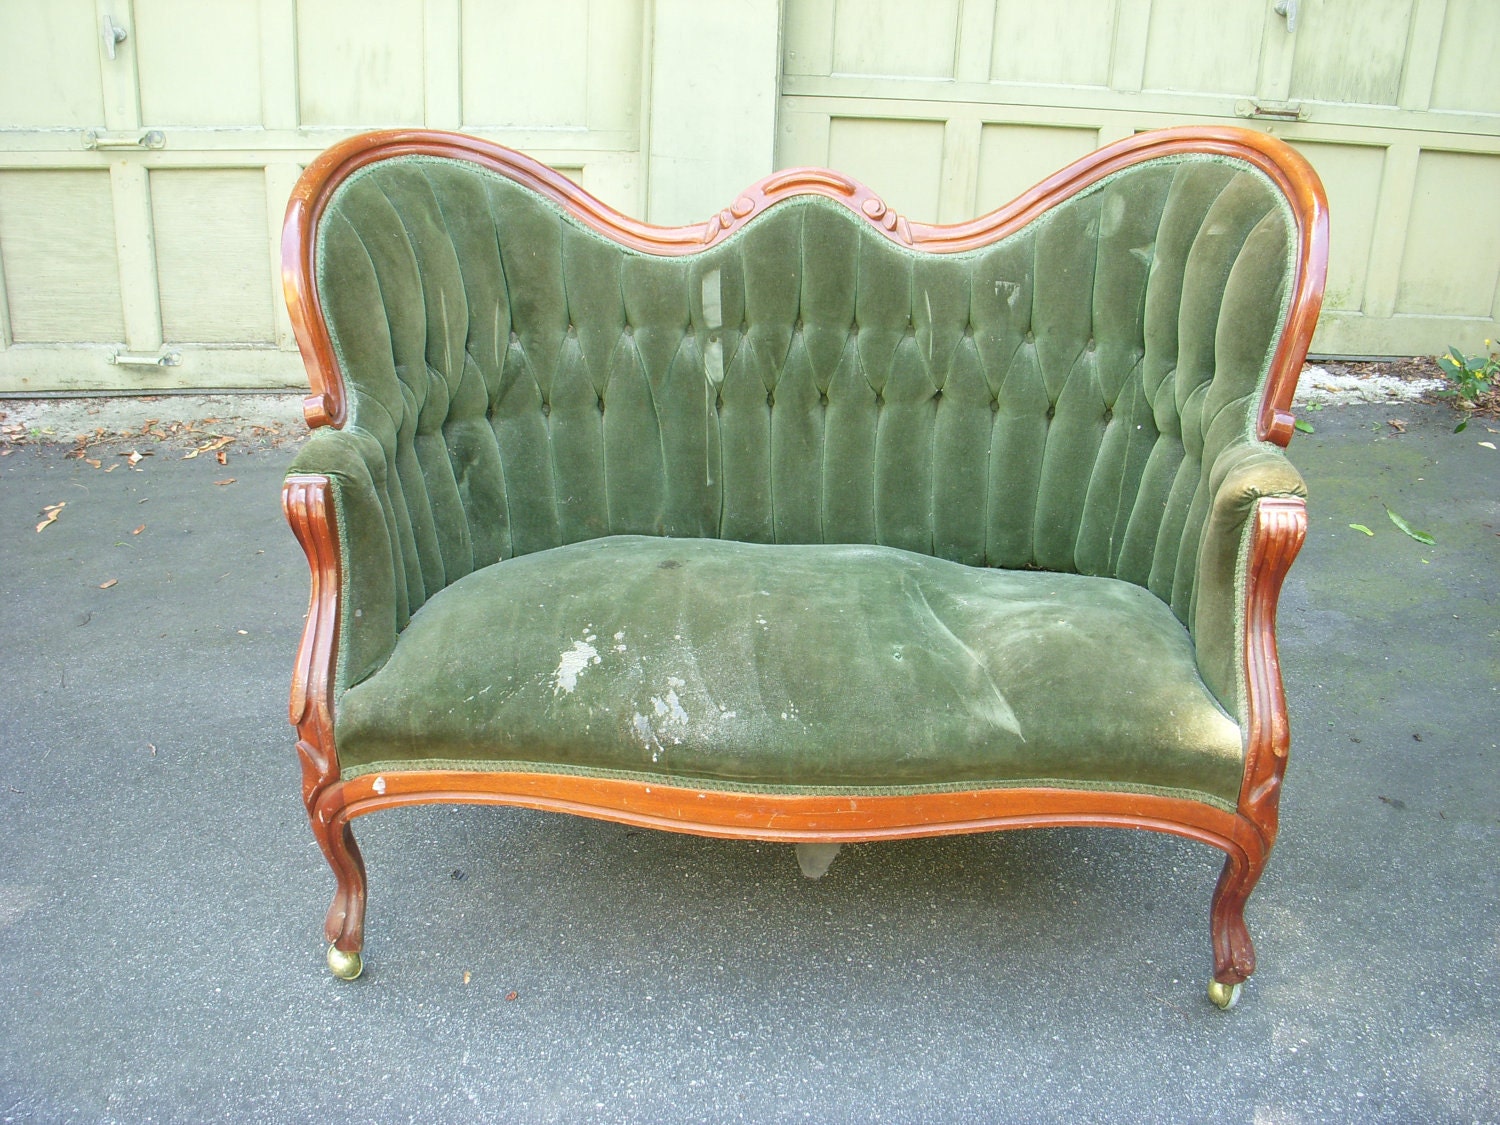 Sale Vintage Depression Era Love Seat Couch 1920s 1930s Green